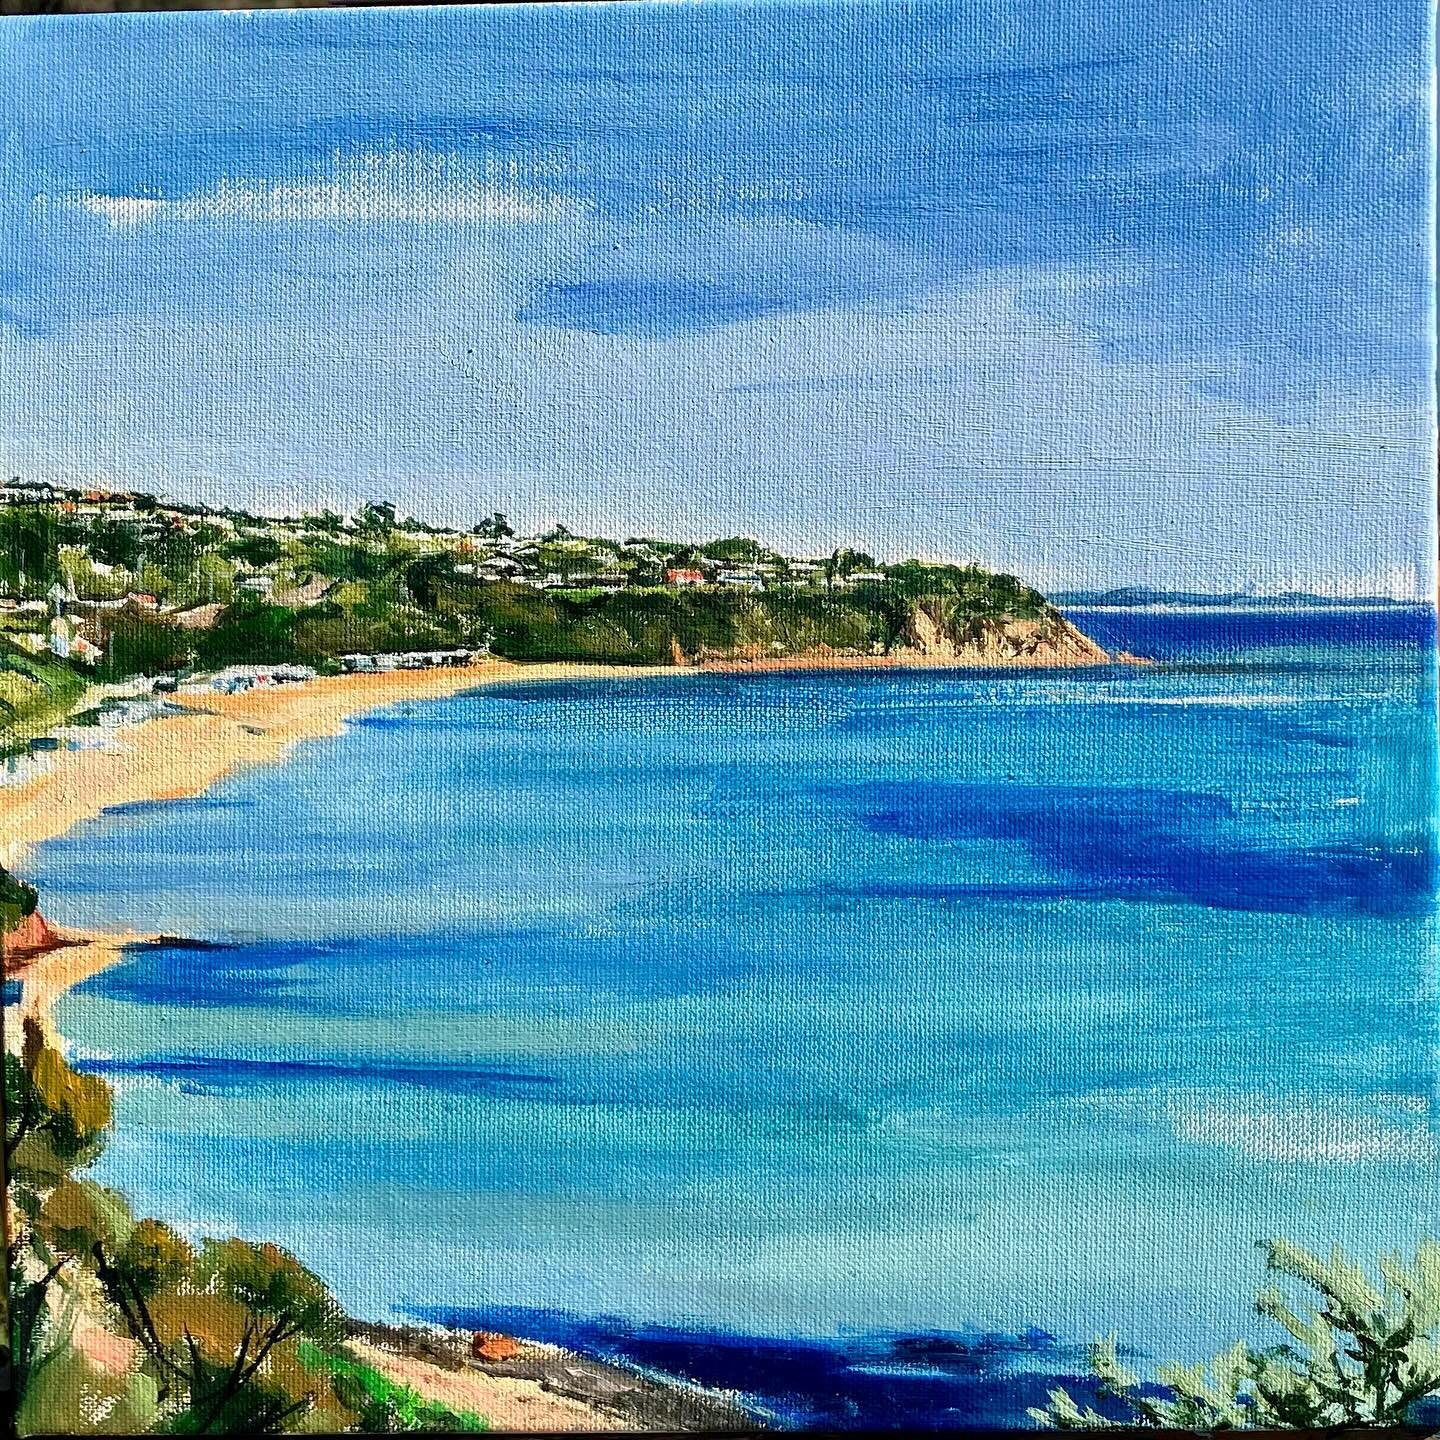 Almost finished!  Great day painting in the sun yesterday.  Just got some details on the beach huts to go on this view of Mount Martha from Bird Rock Beach. Follow my en plein air oil painting at @jillmcfarlaneart.  Paintings coming soon to @artisans